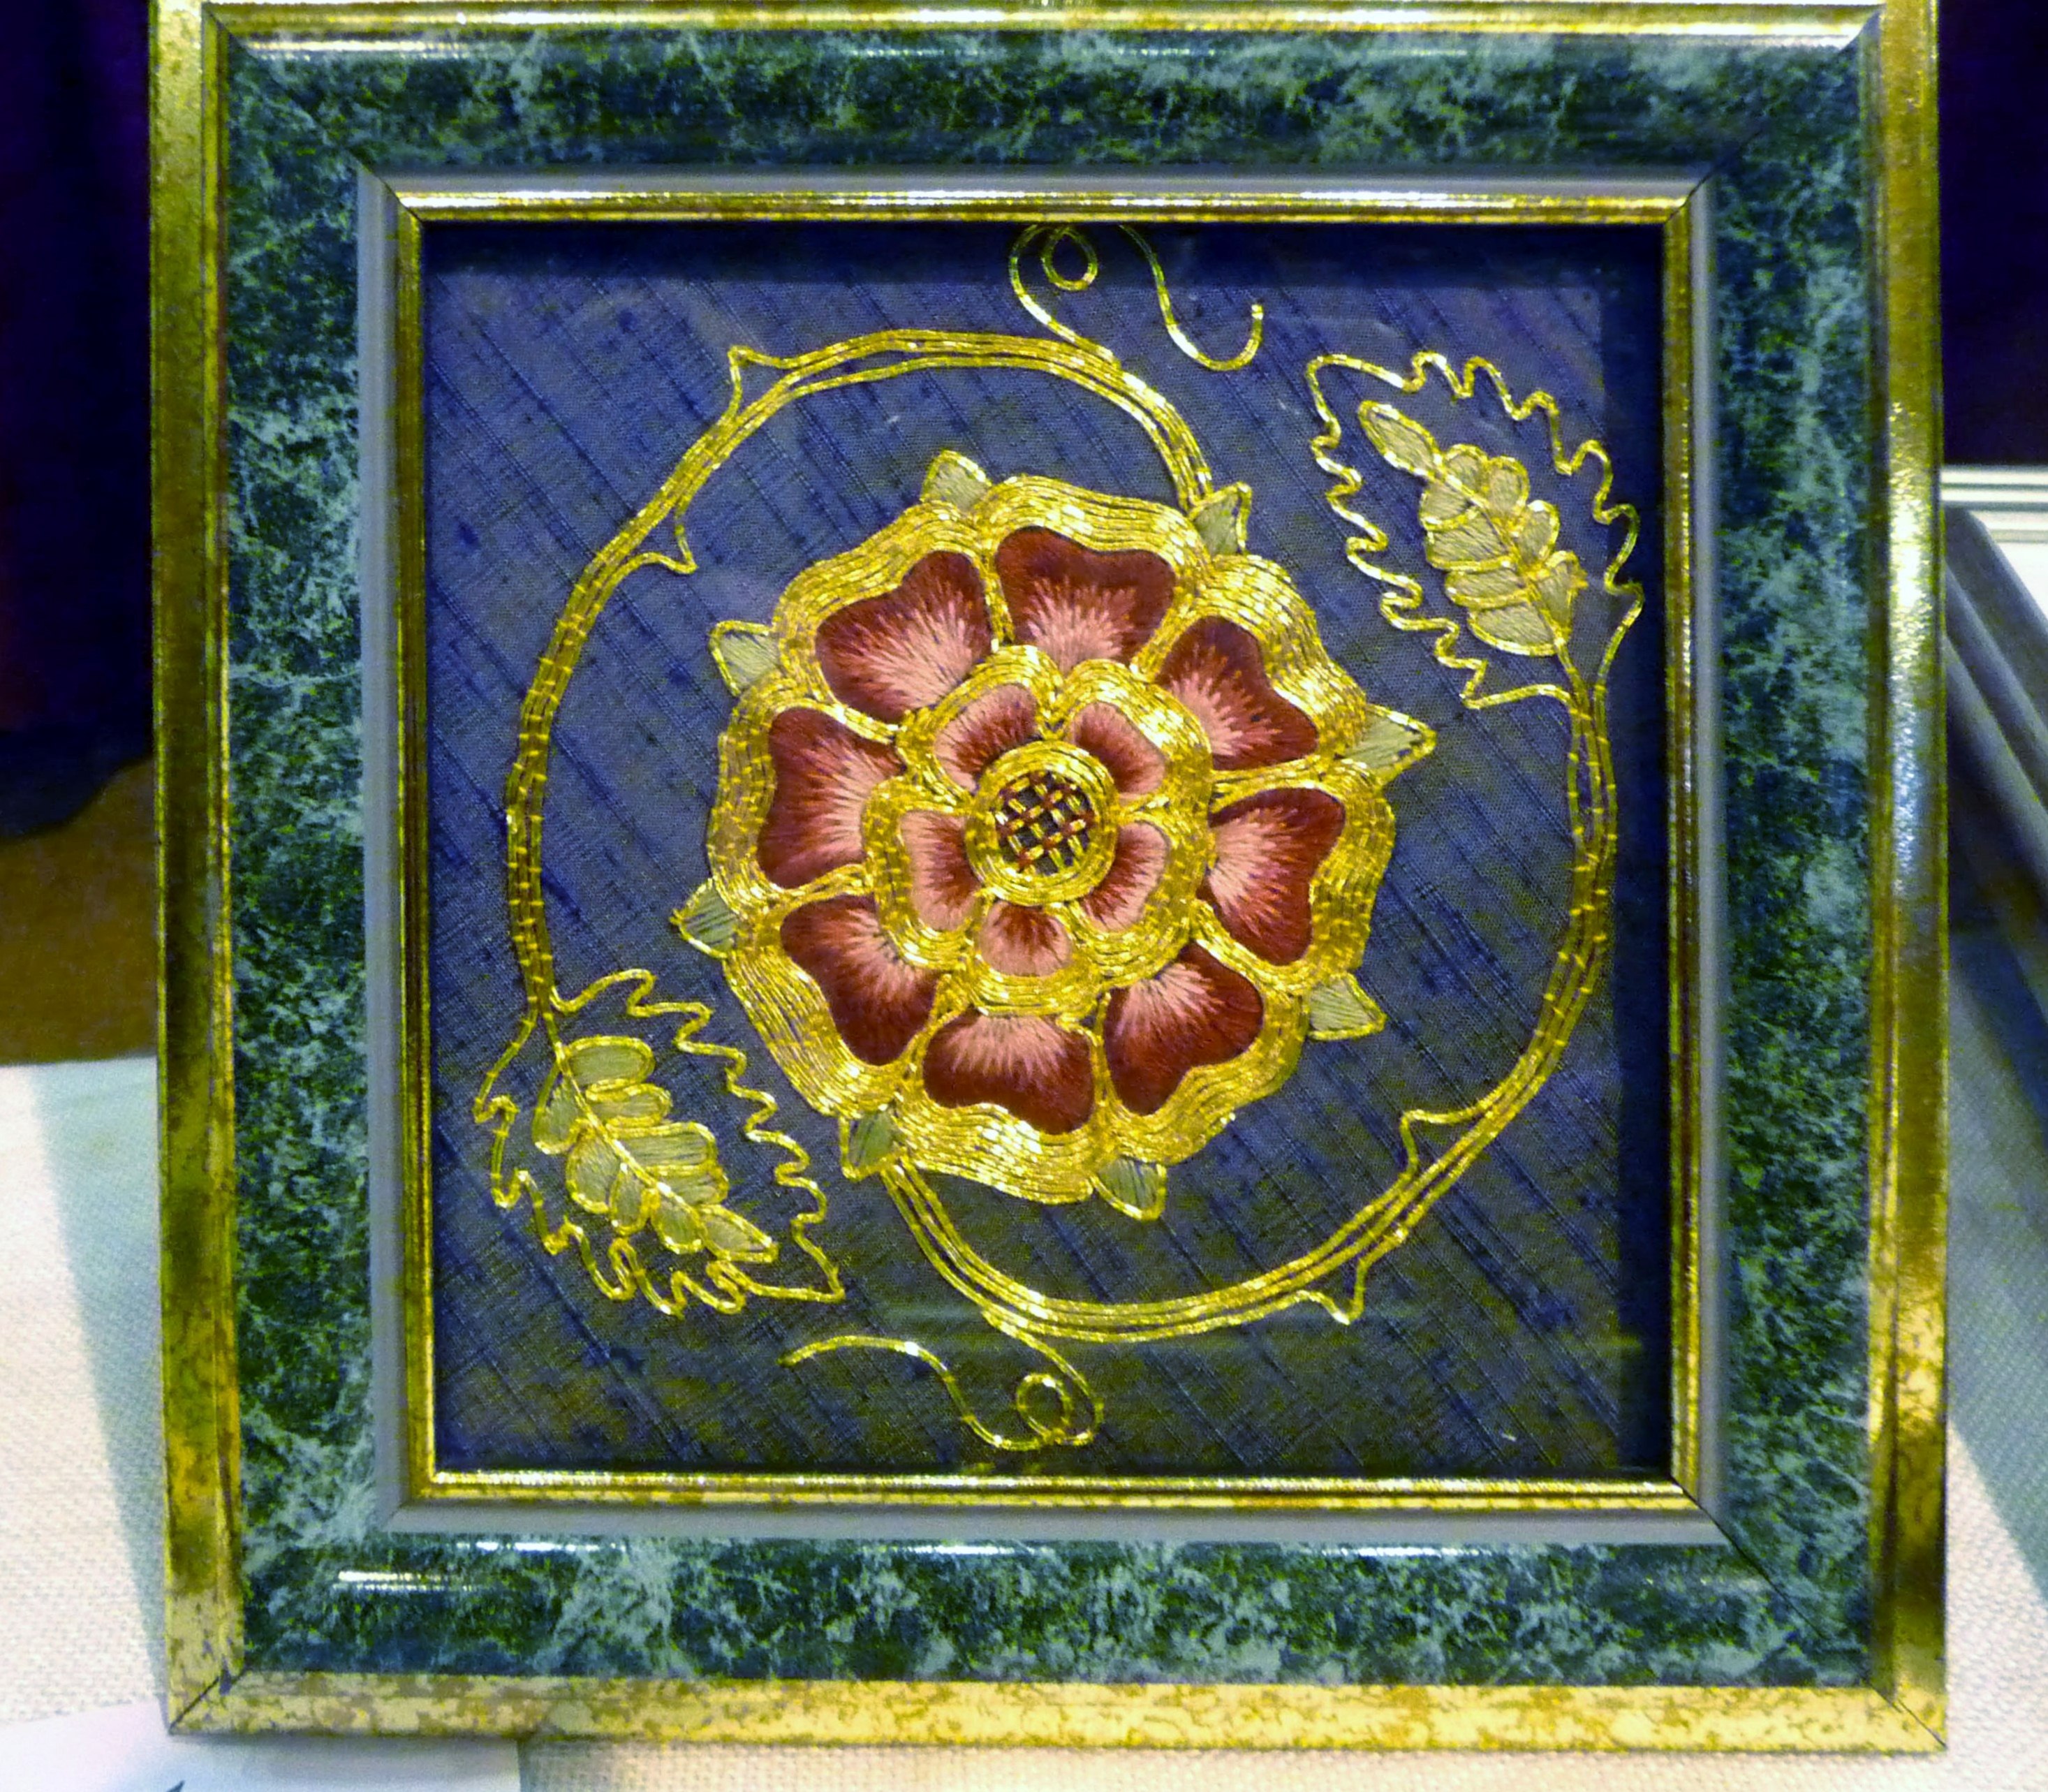 entry to Traditional Embroidery Competition 2013